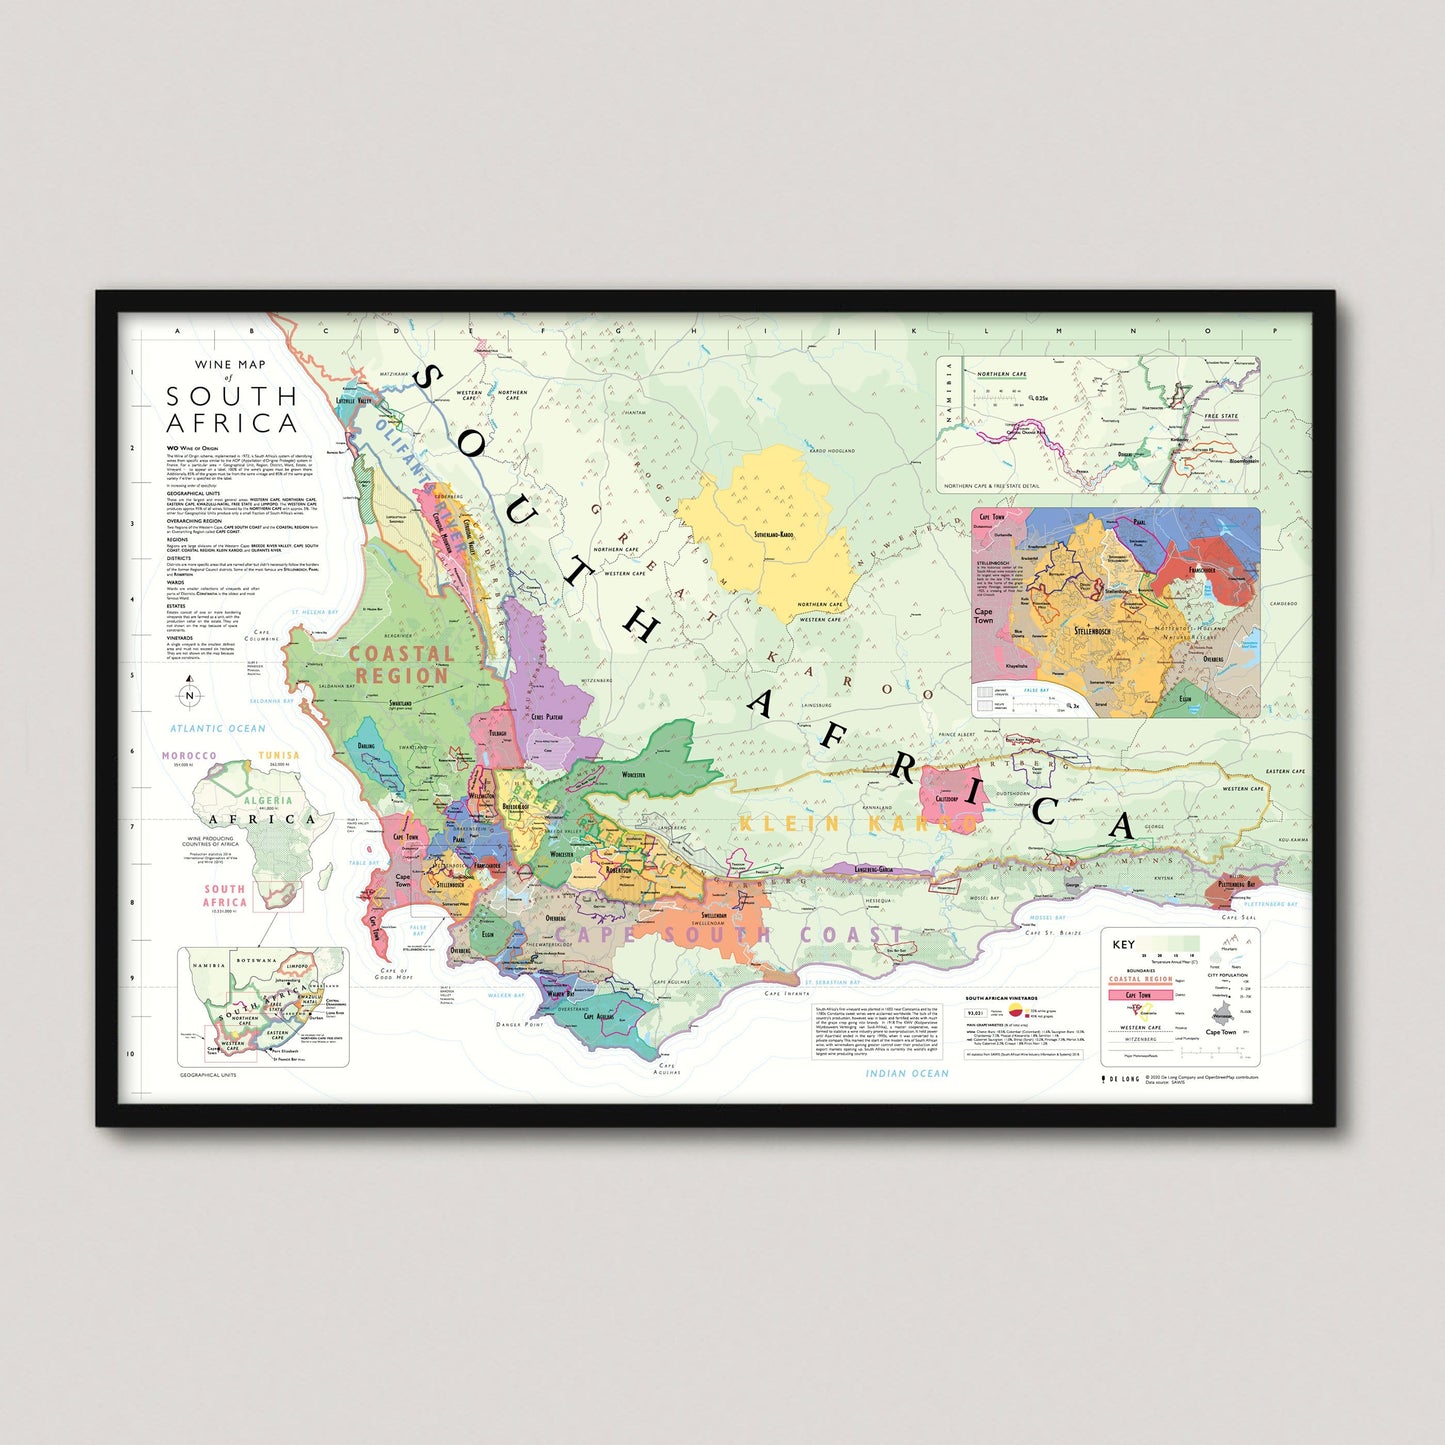 Wine Map of South Africa framed